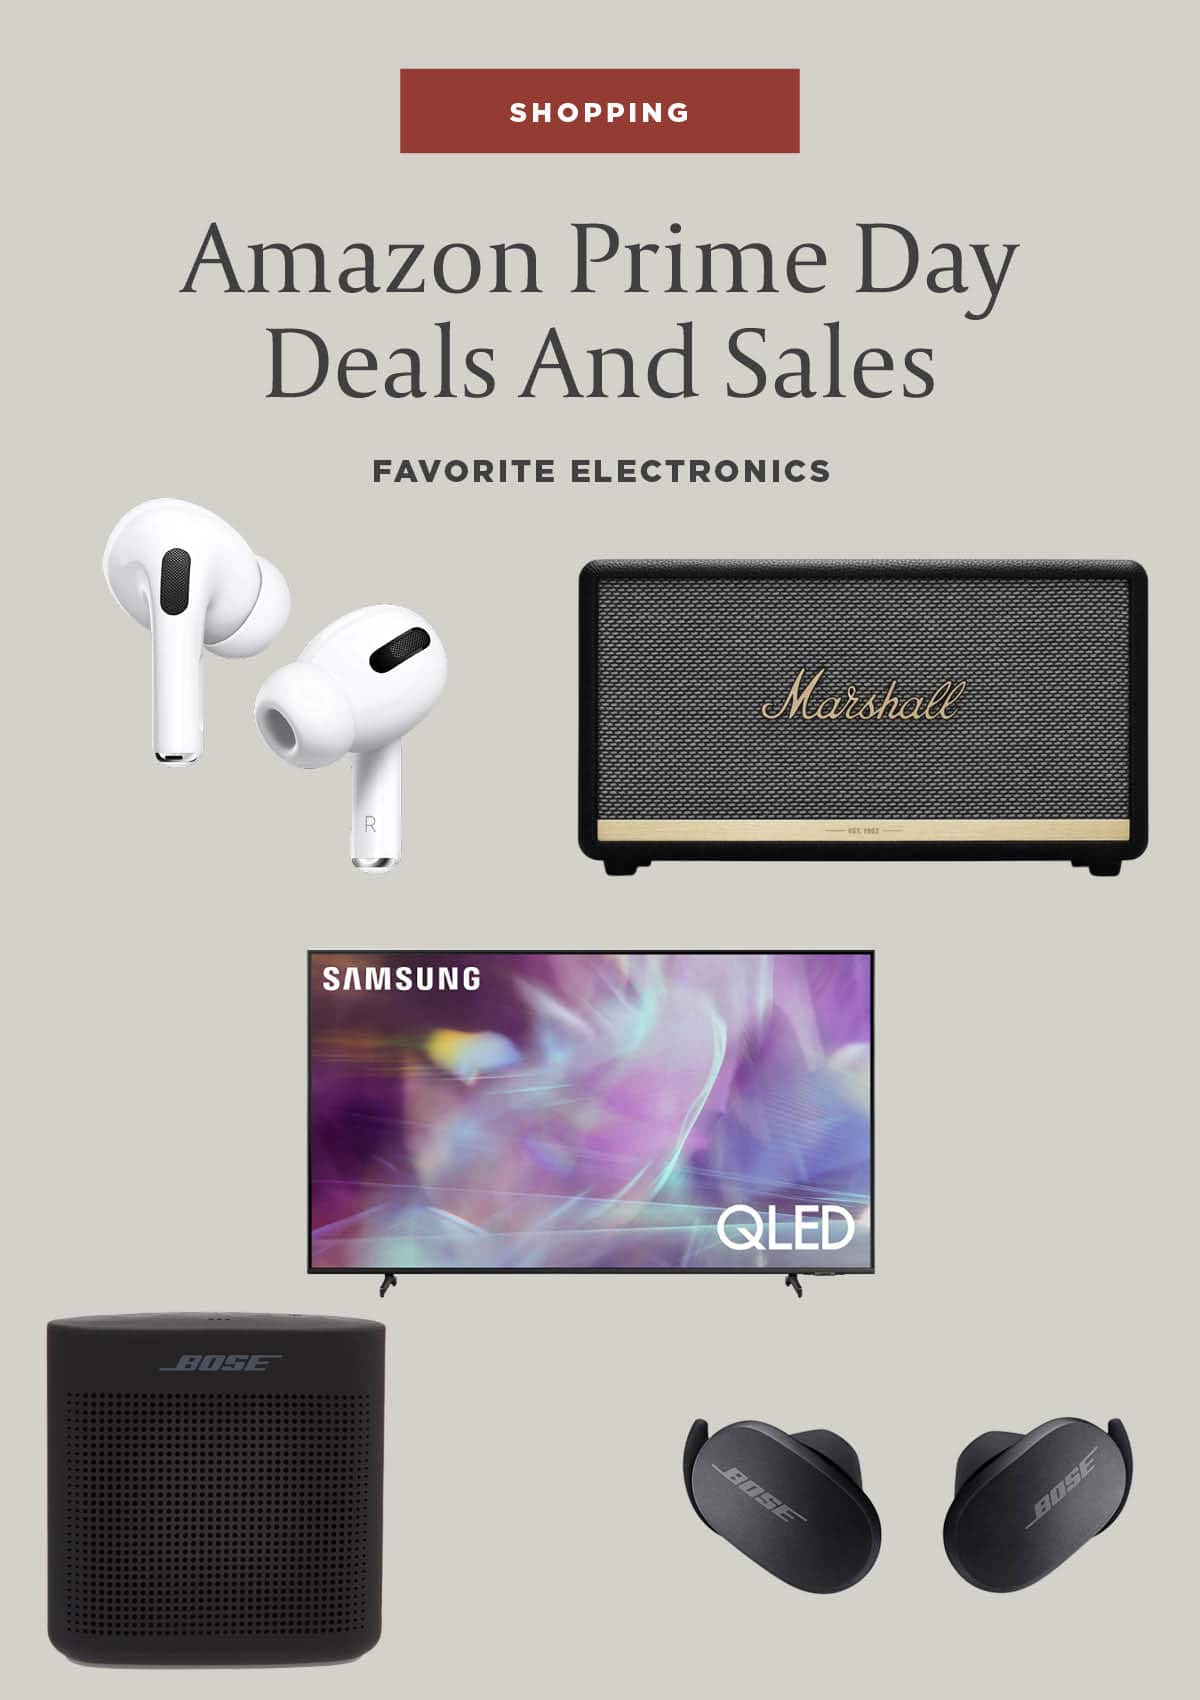 https://houseofhipsters.com/wp-content/uploads/2022/07/amazon-prime-day-deals3.jpg